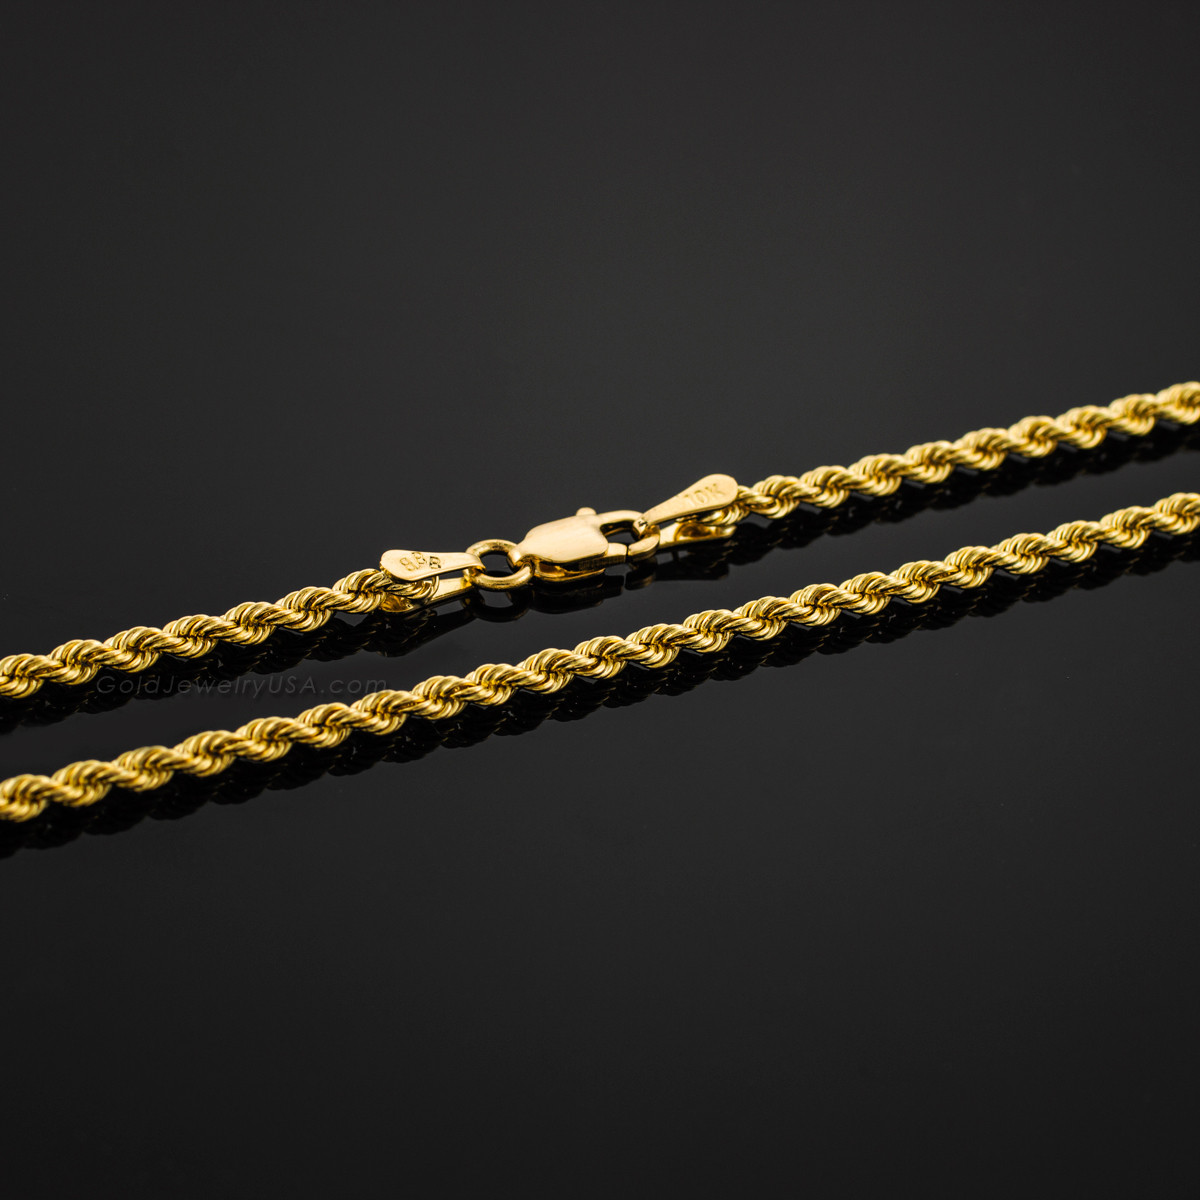 10K Hollow Gold Rope Chain - 22